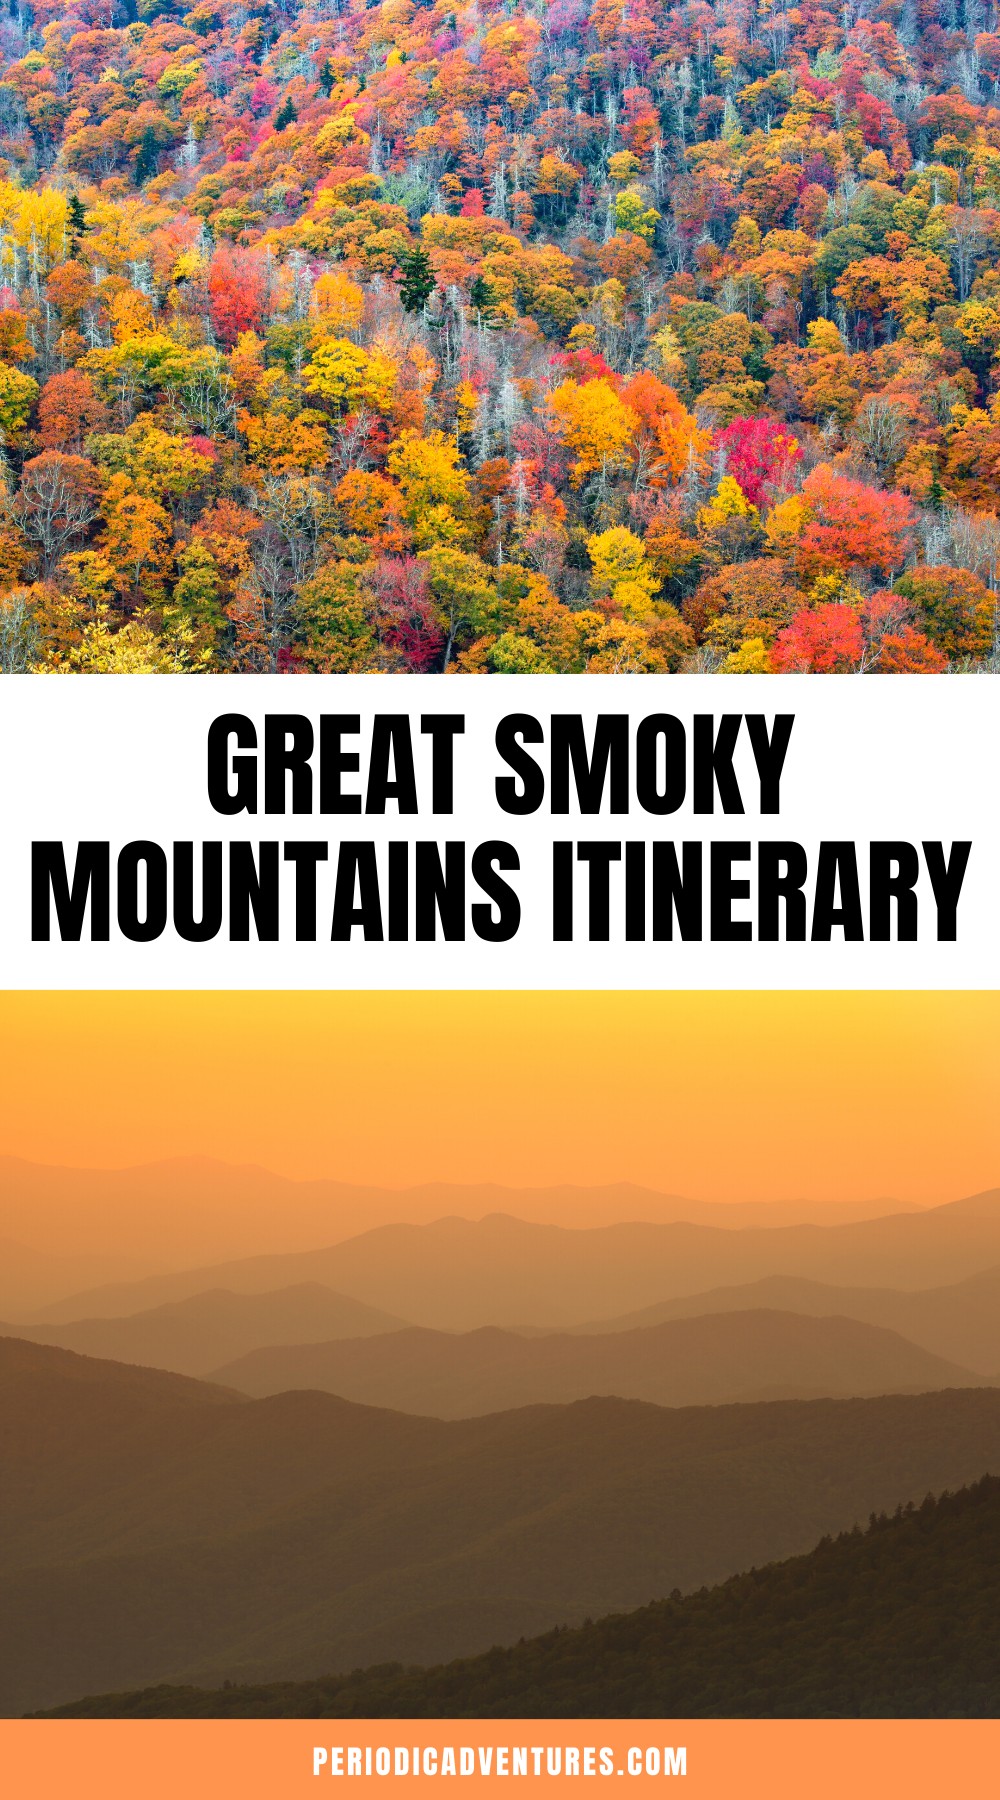 This Great Smoky Mountains itinerary has all the best things to do, where to stay, how to get there, Smoky Mountain travel tips, and more!